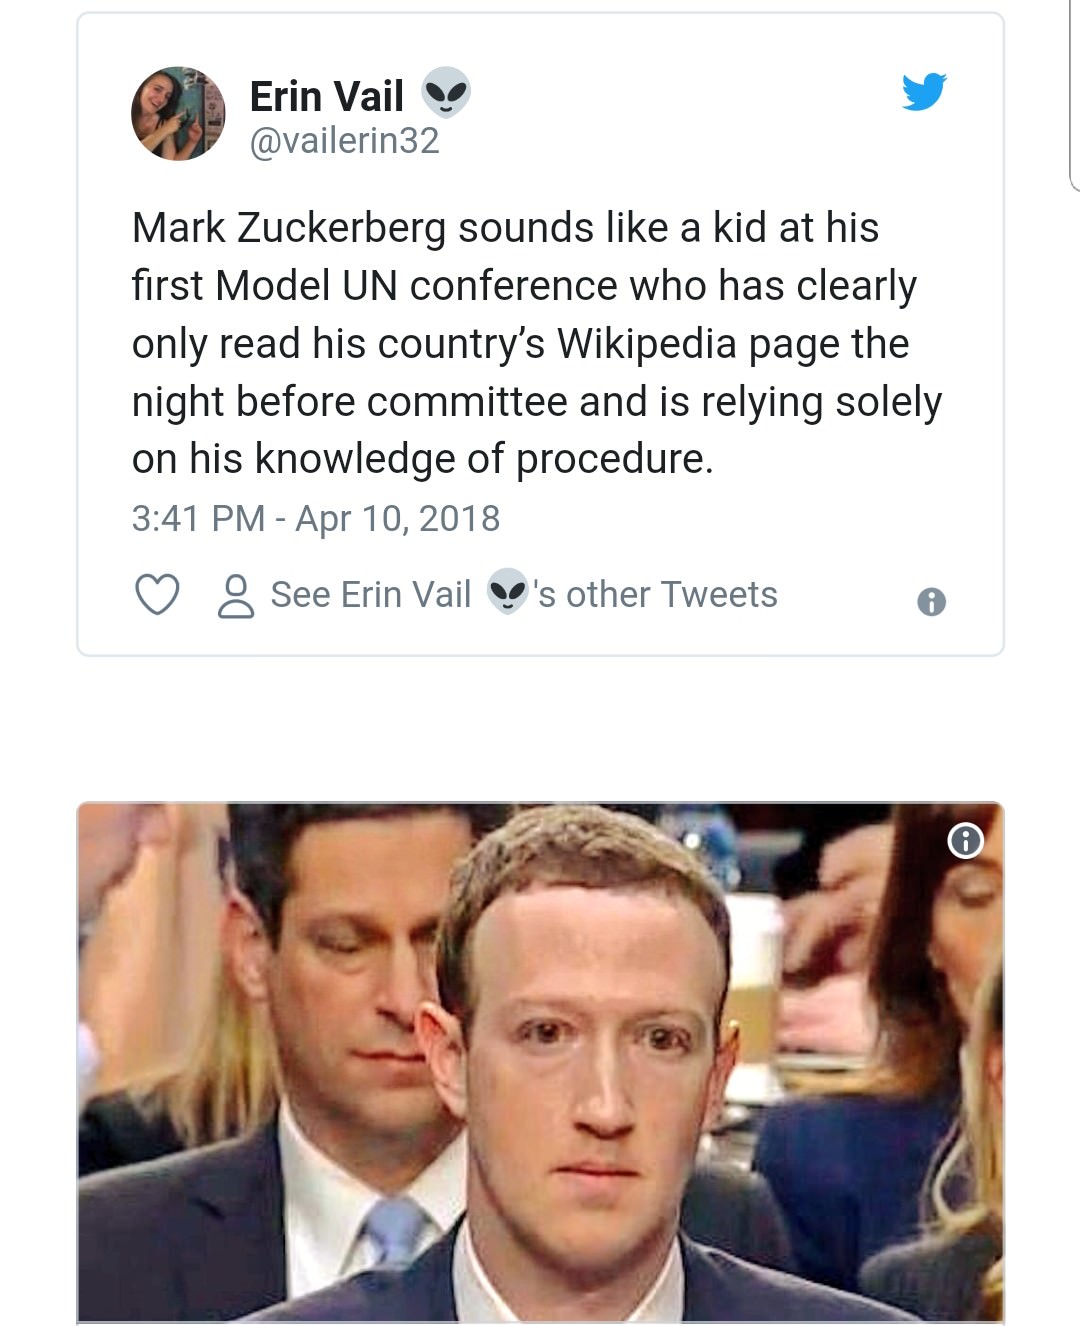 facebook congress memes - Erin Vail Mark Zuckerberg sounds a kid at his first Model Un conference who has clearly only read his country's Wikipedia page the night before committee and is relying solely on his knowledge of procedure. See Erin Vail bo's oth